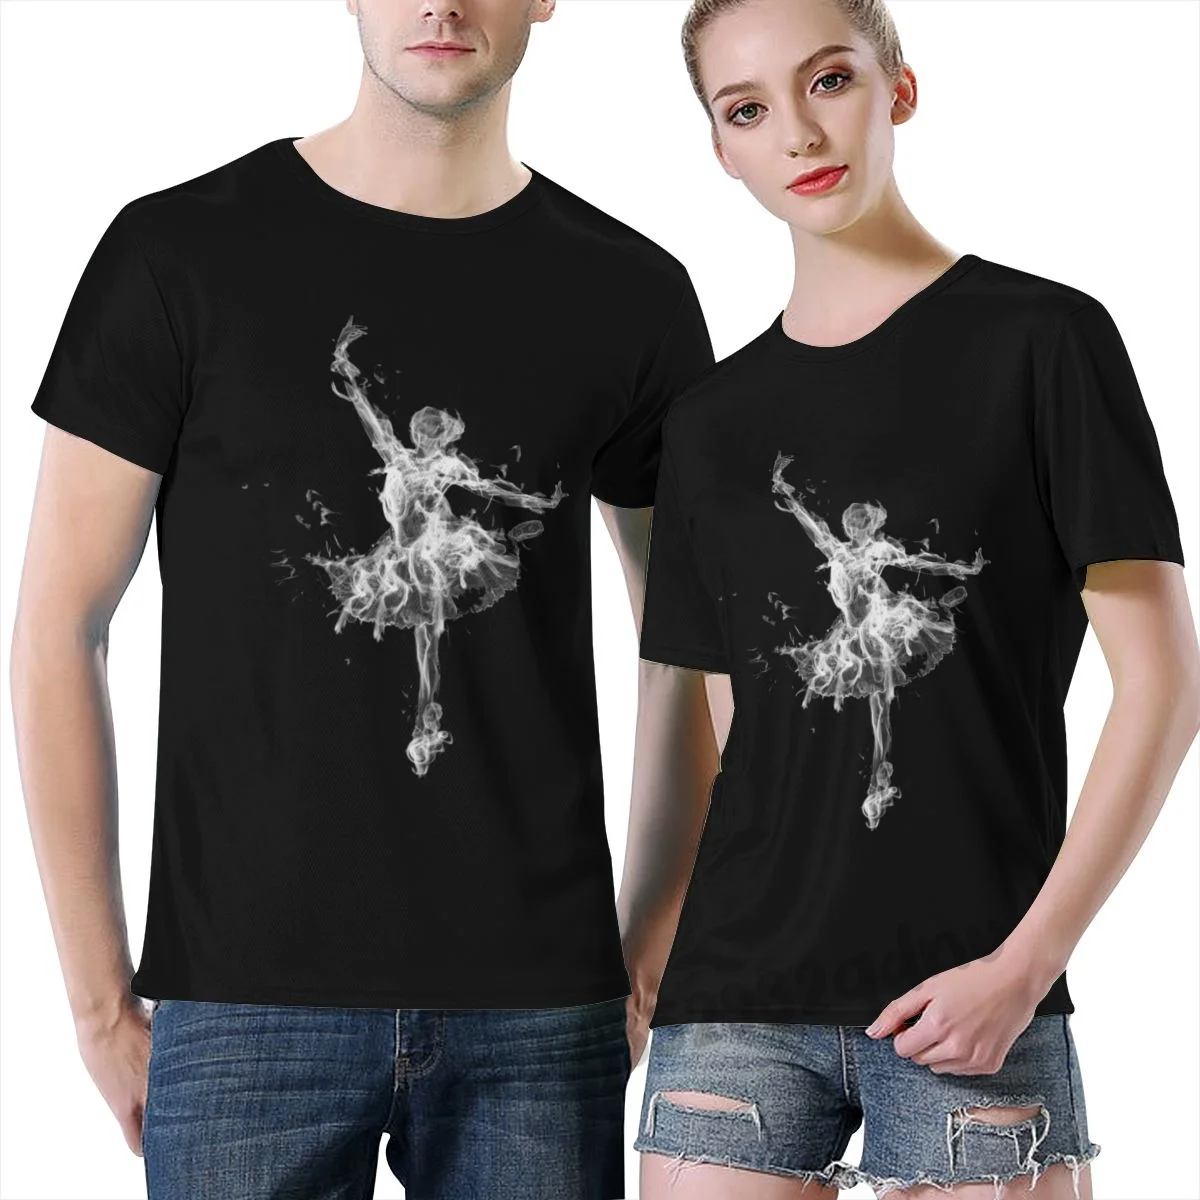 

White Smoke Elements For Ballet T Shirt Short Sleeve Family Designing Natural Euro Size S-6xl Humor Crazy Shirt